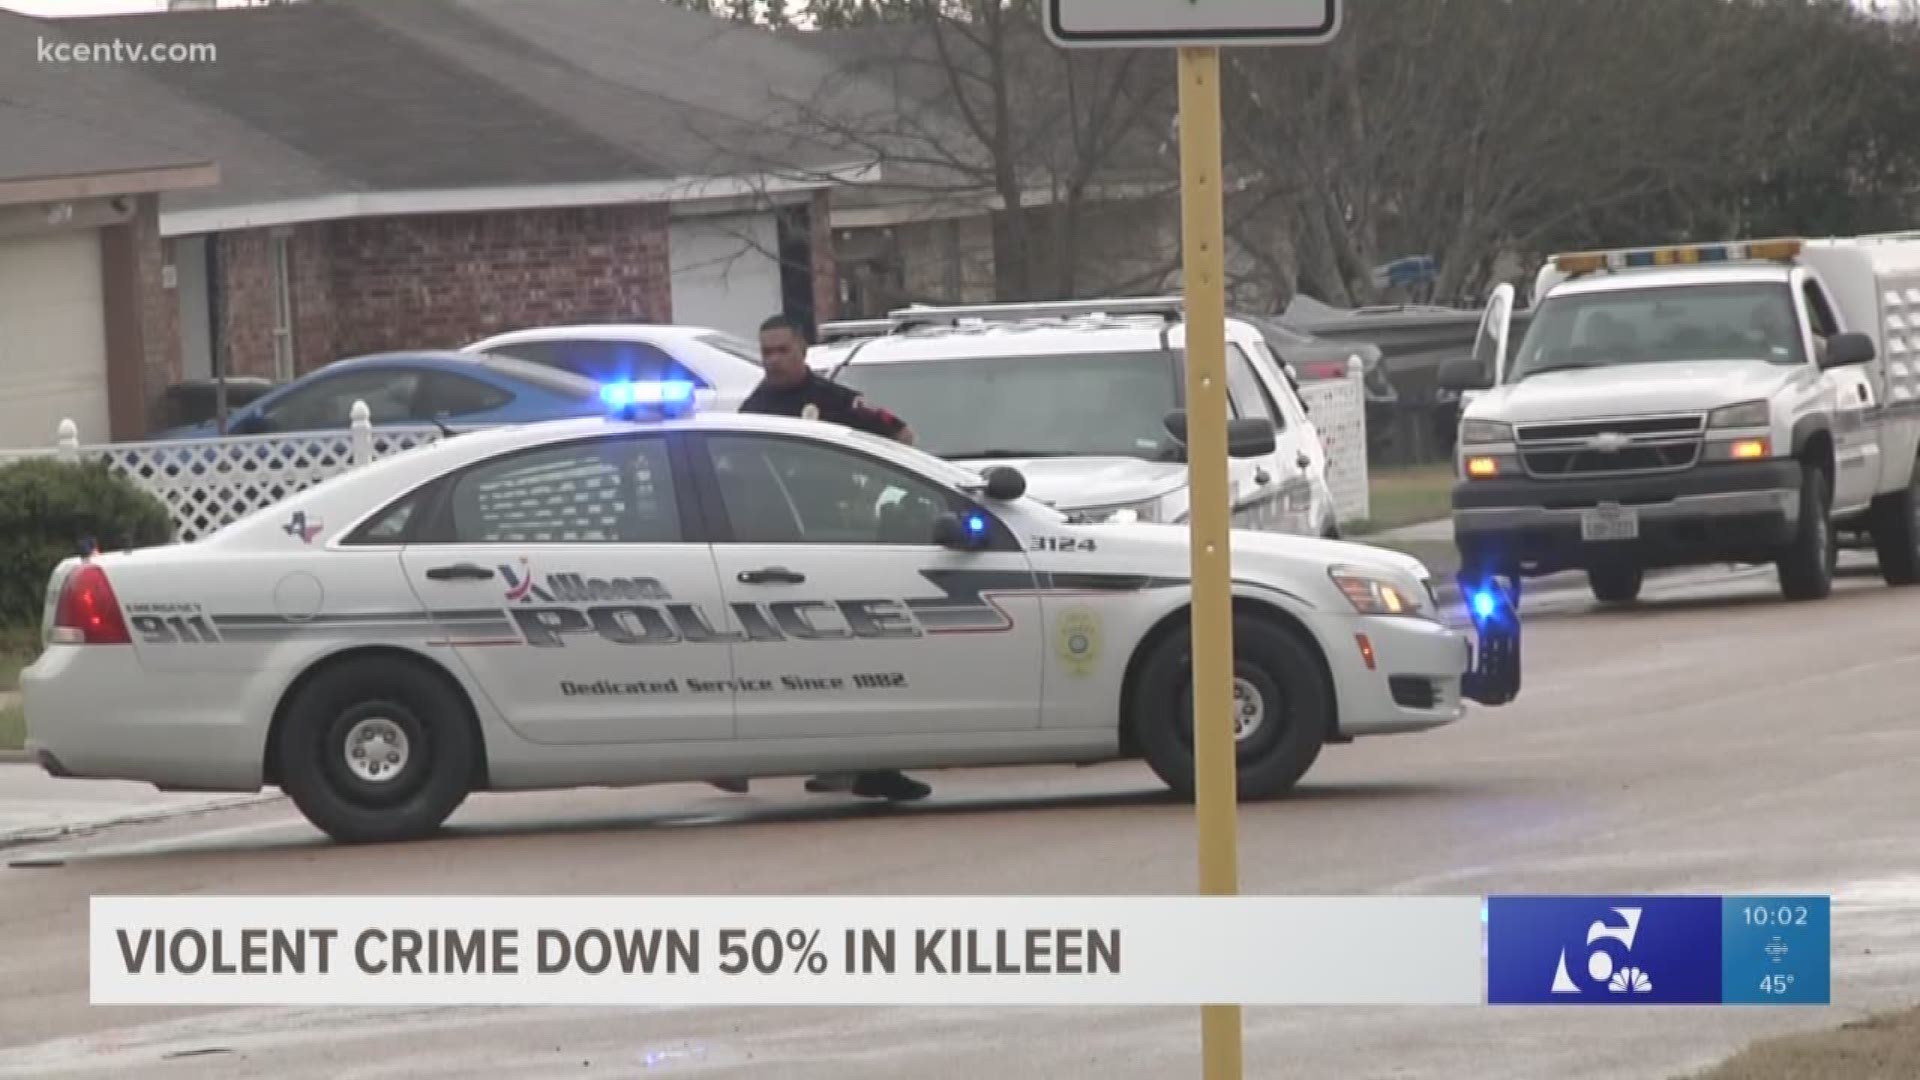 Violent crime in Killeen saw a 50 percent drop from 2017 to 2018.